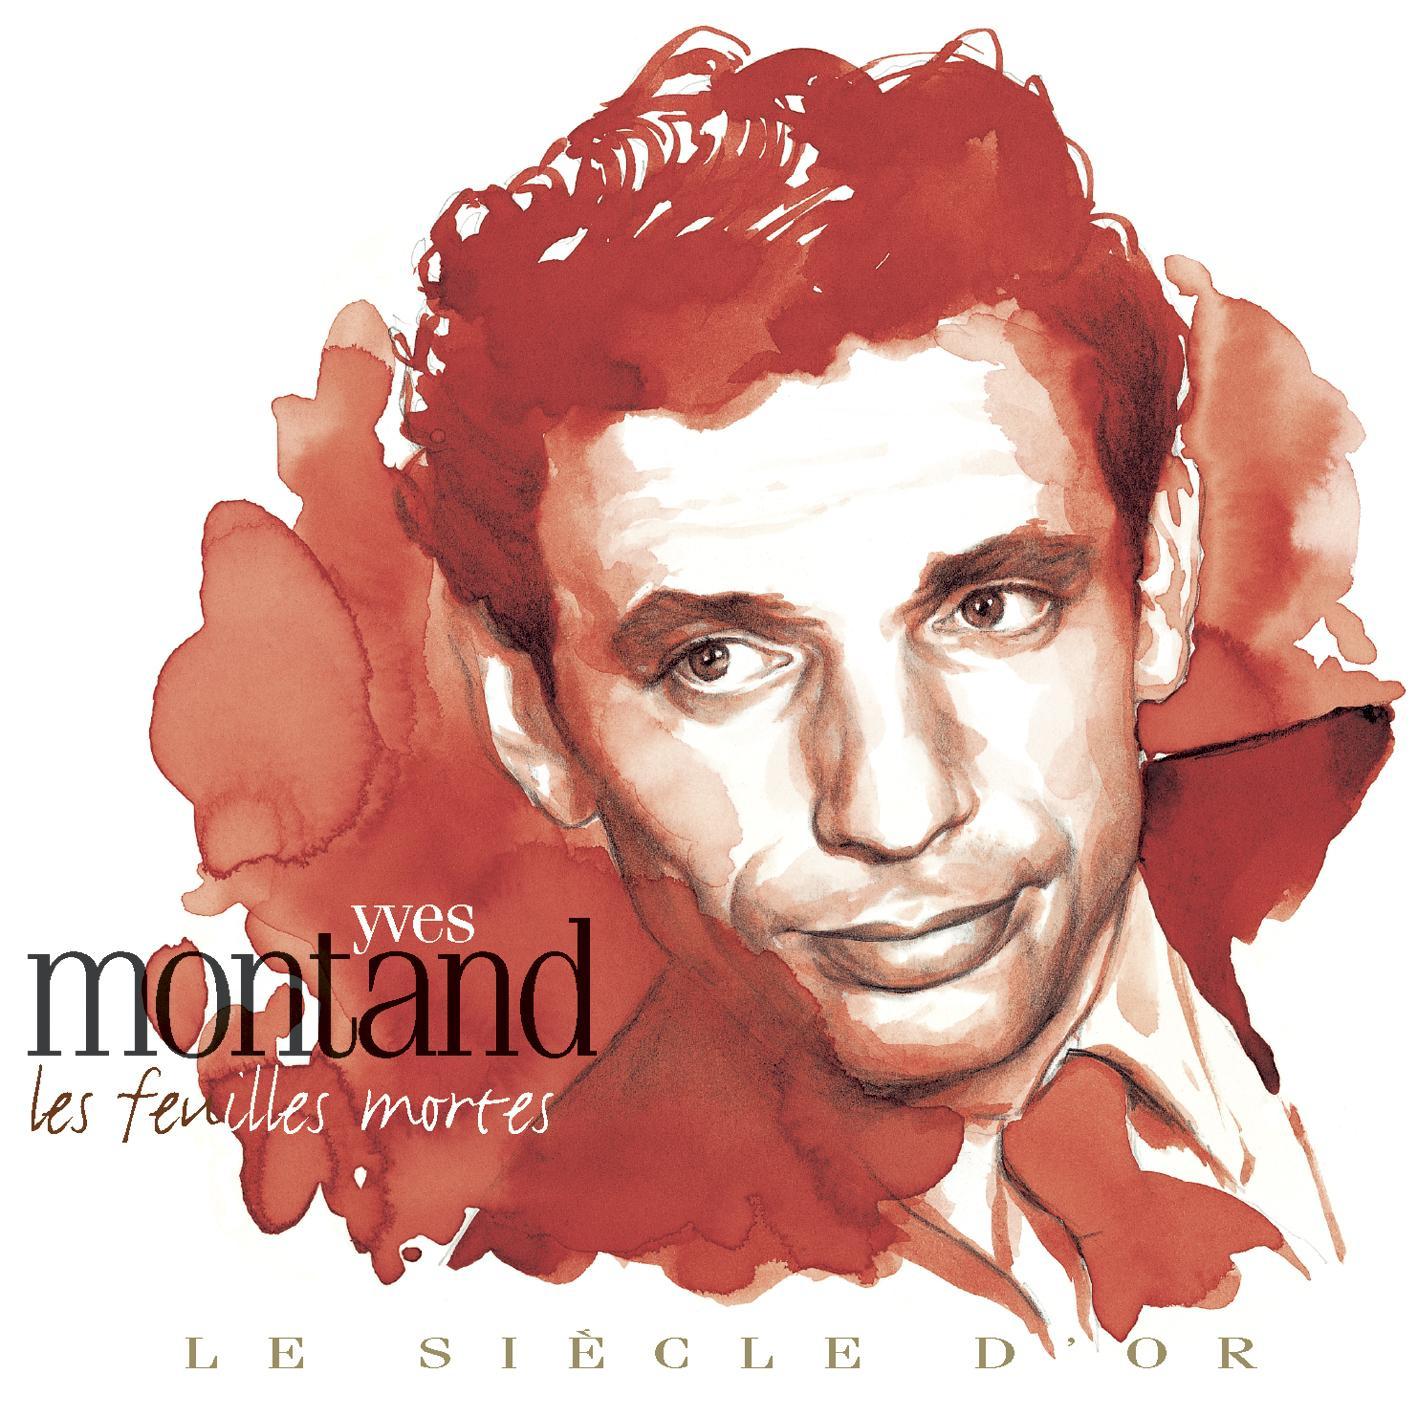 Yves Montand: Le sie cle d' or